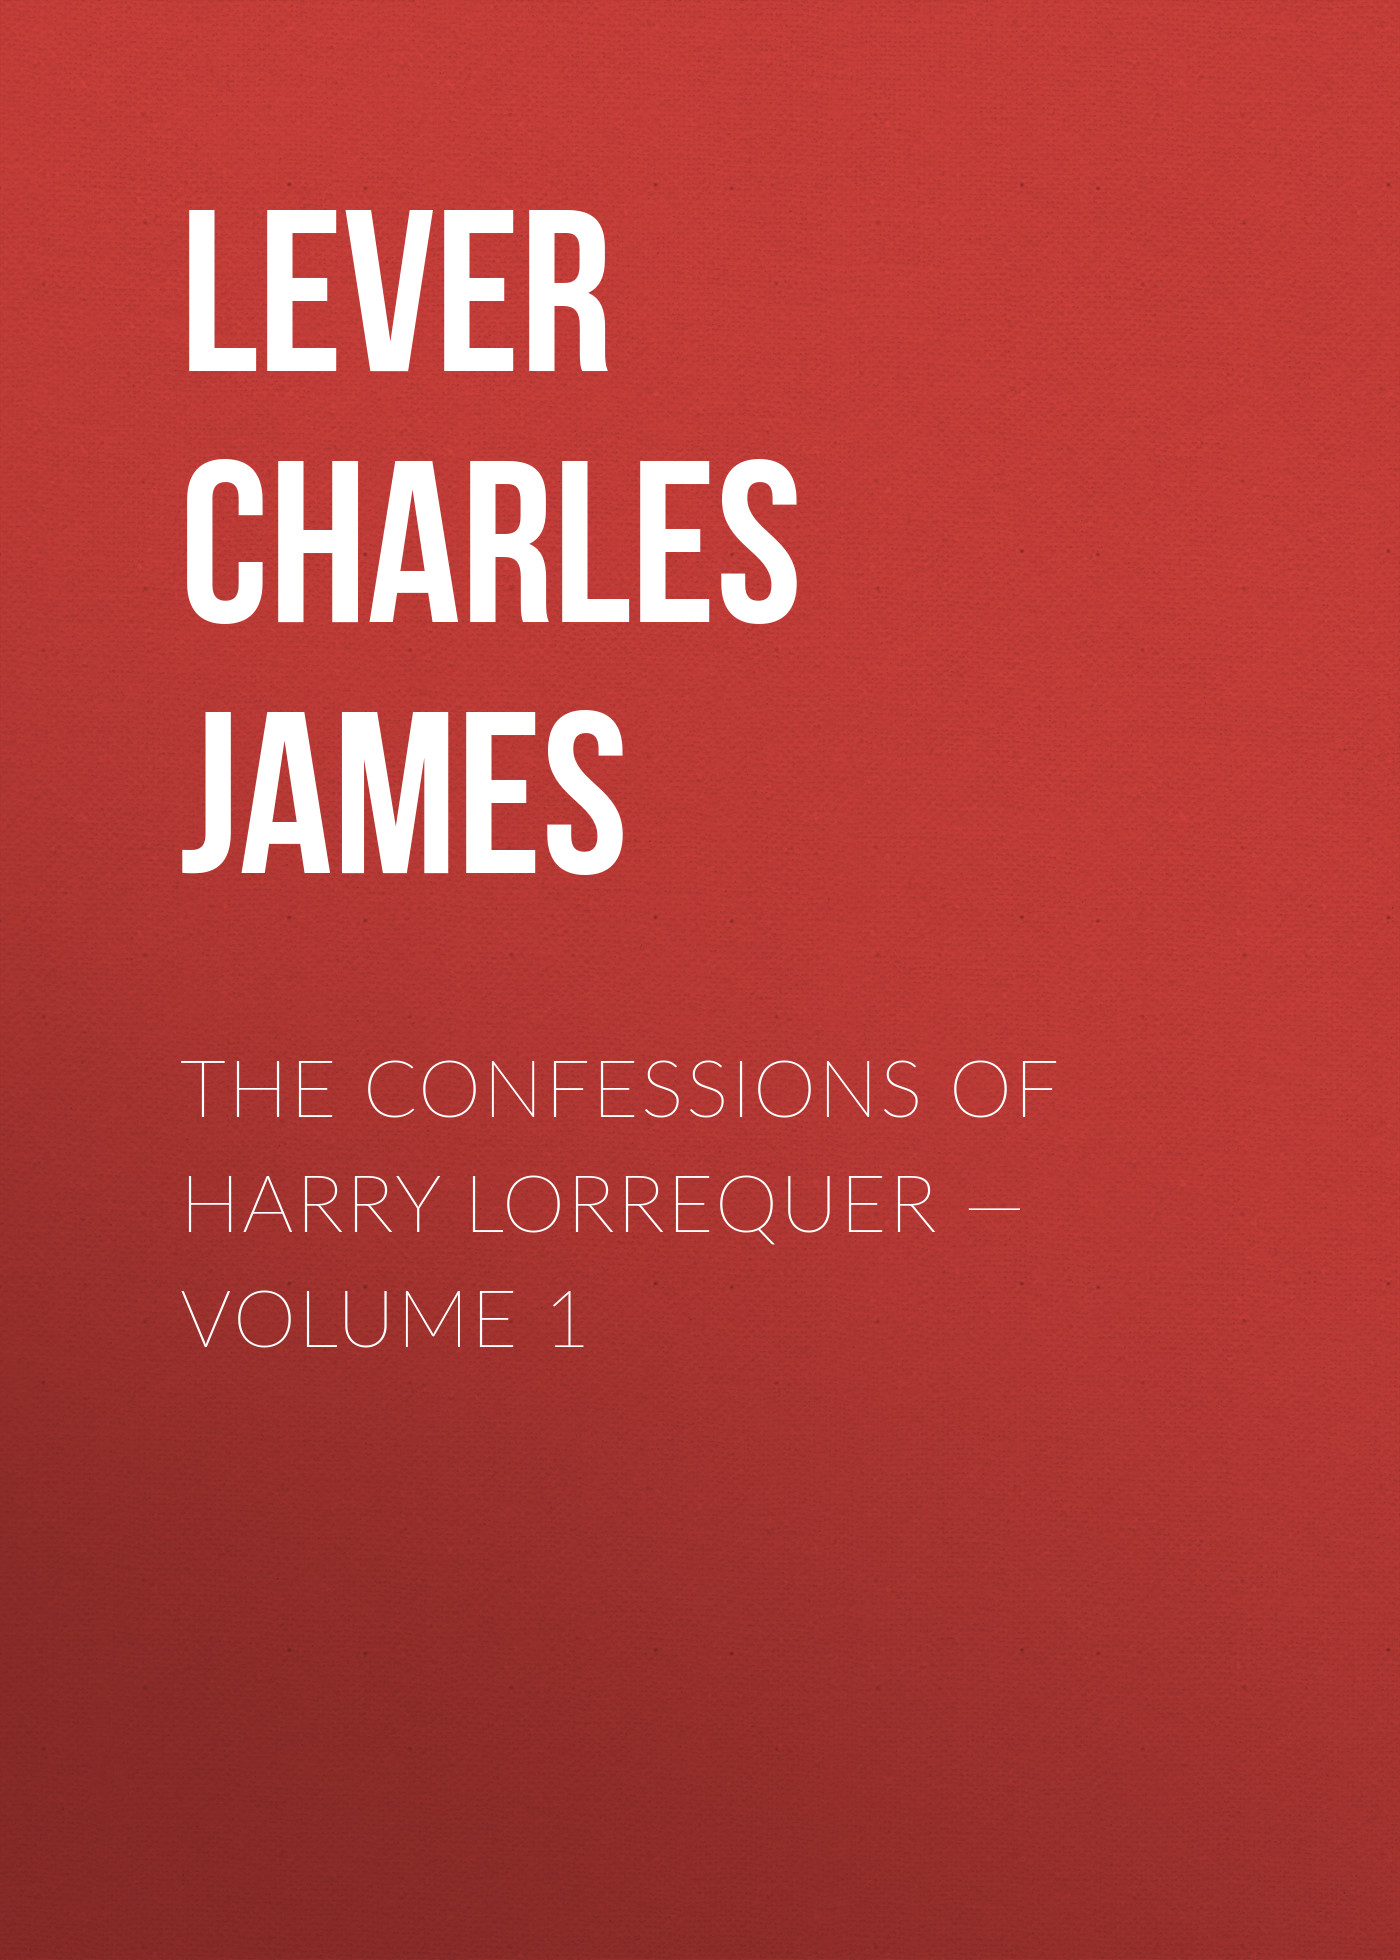 The Confessions of Harry Lorrequer— Volume 1